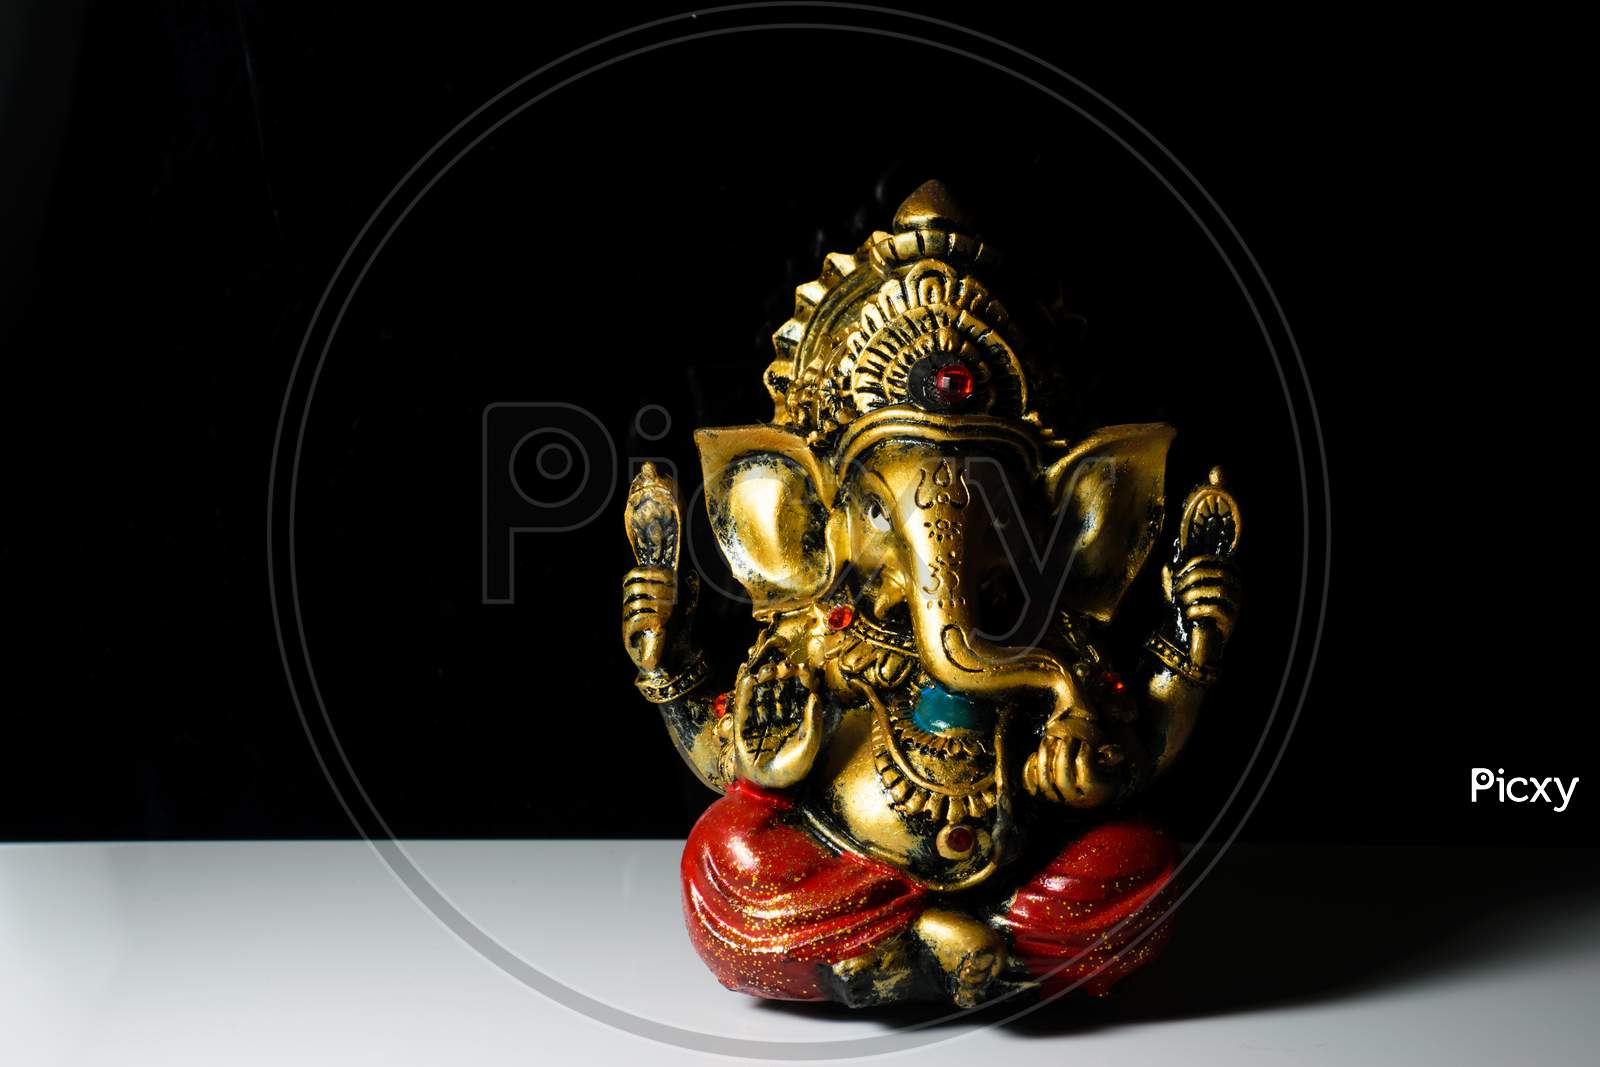 An Isolated Sculpture Of The Indian God Ganesha Placed On A Reflective White Table In A Dark Background